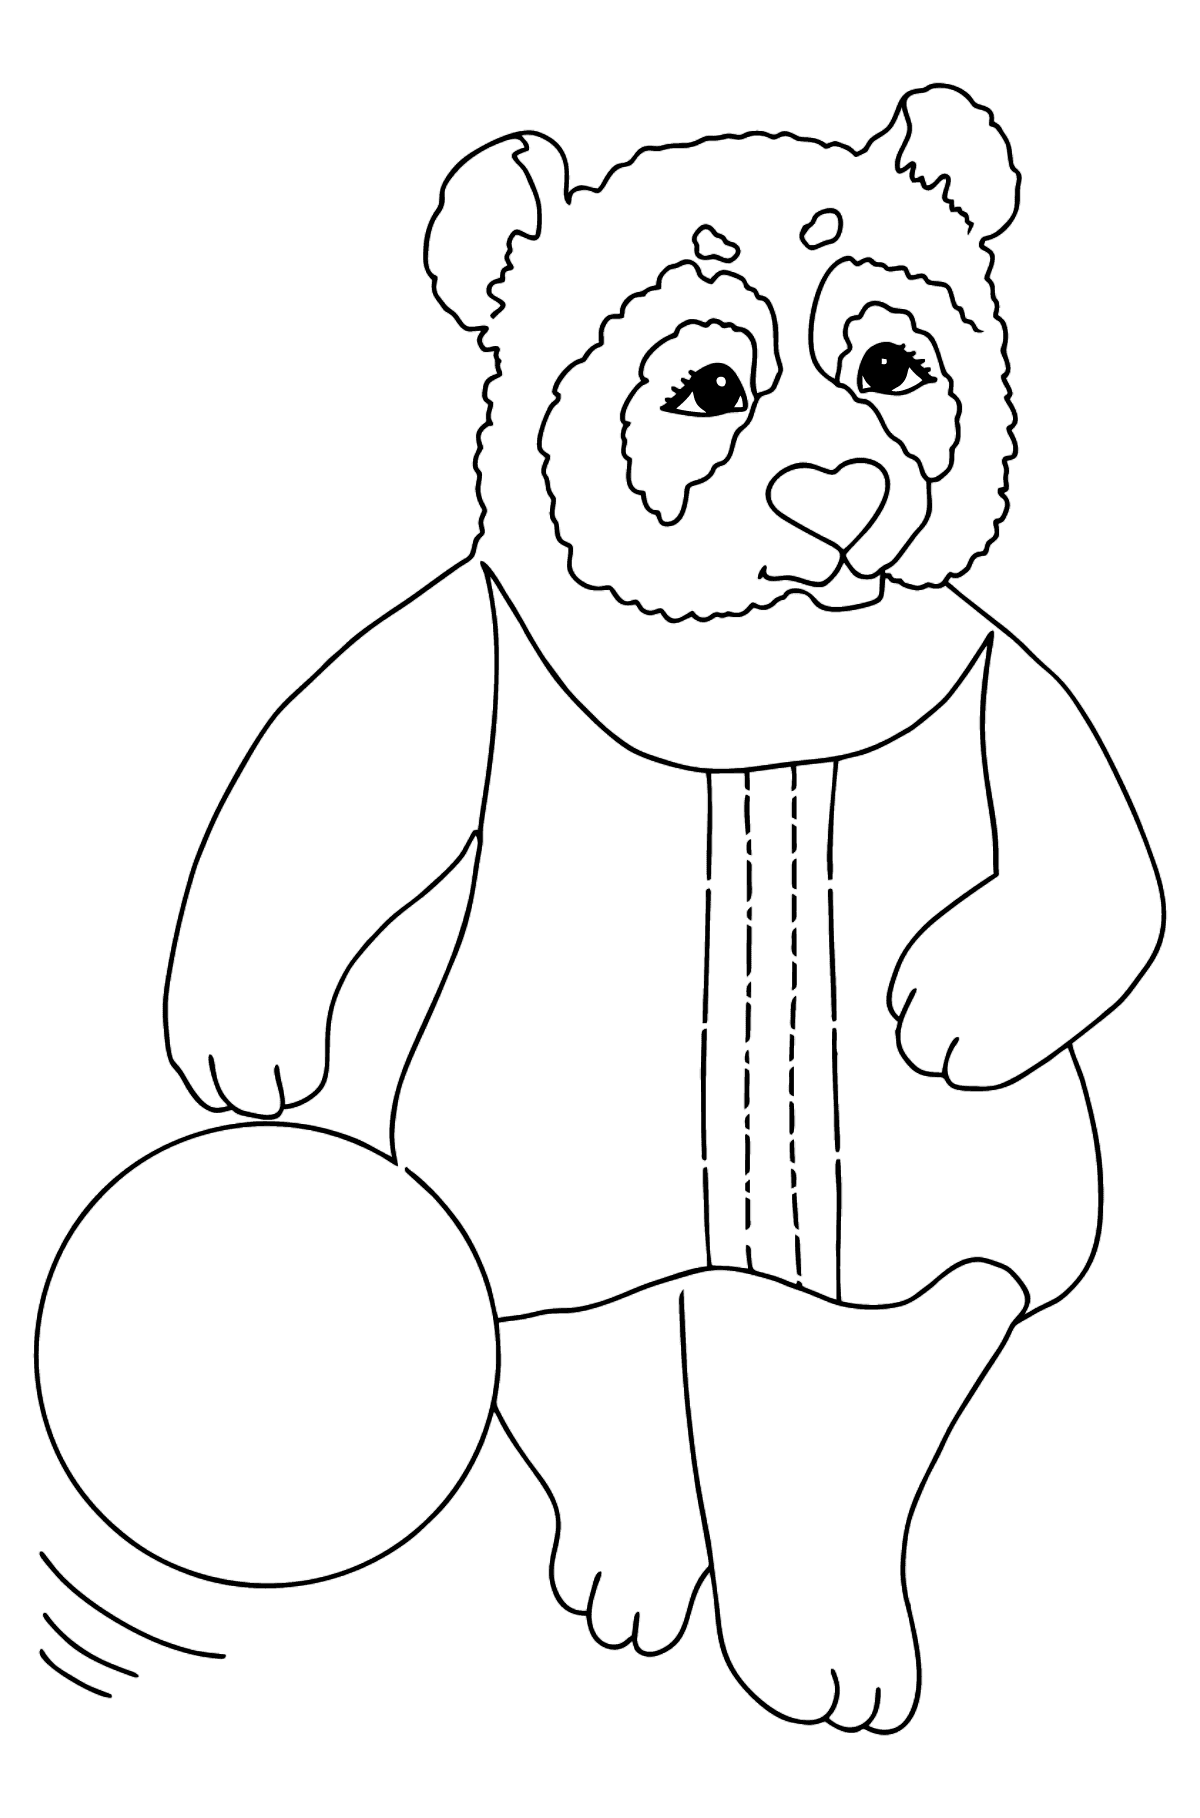 Panda For Babies (Simple) coloring page - Coloring Pages for Kids